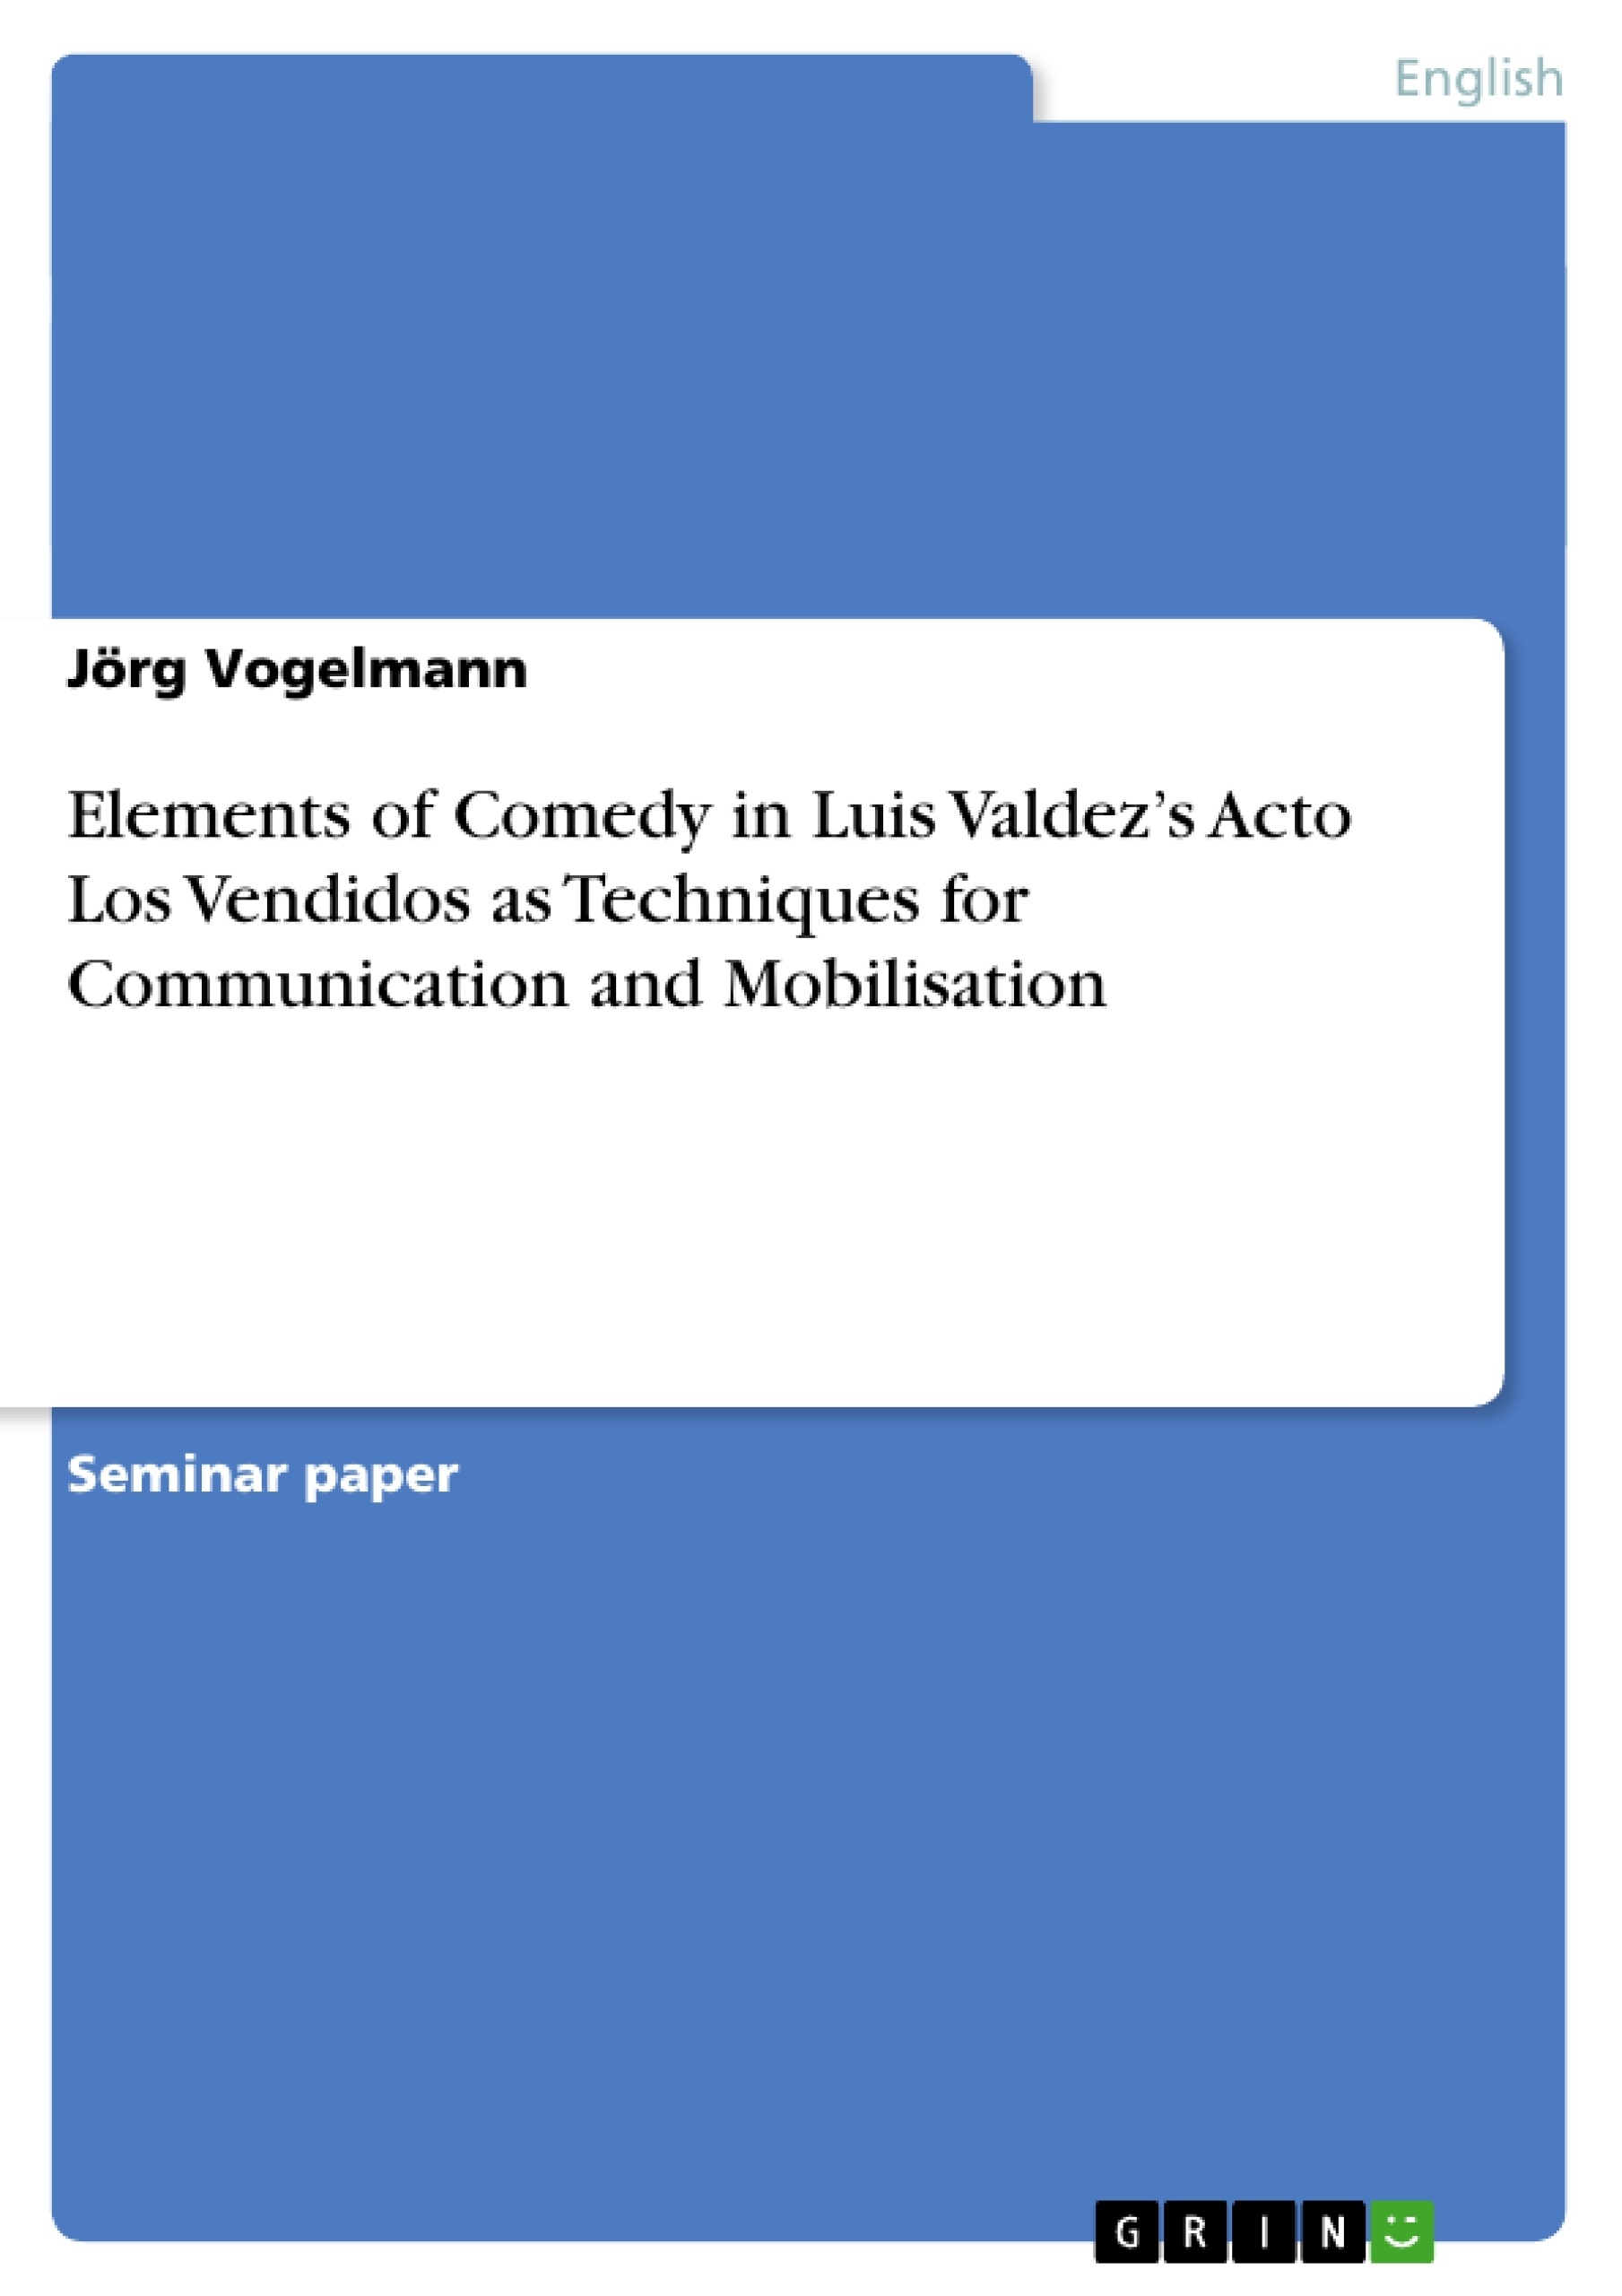 Title: Elements of Comedy in Luis Valdez’s Acto Los Vendidos as Techniques for Communication and Mobilisation